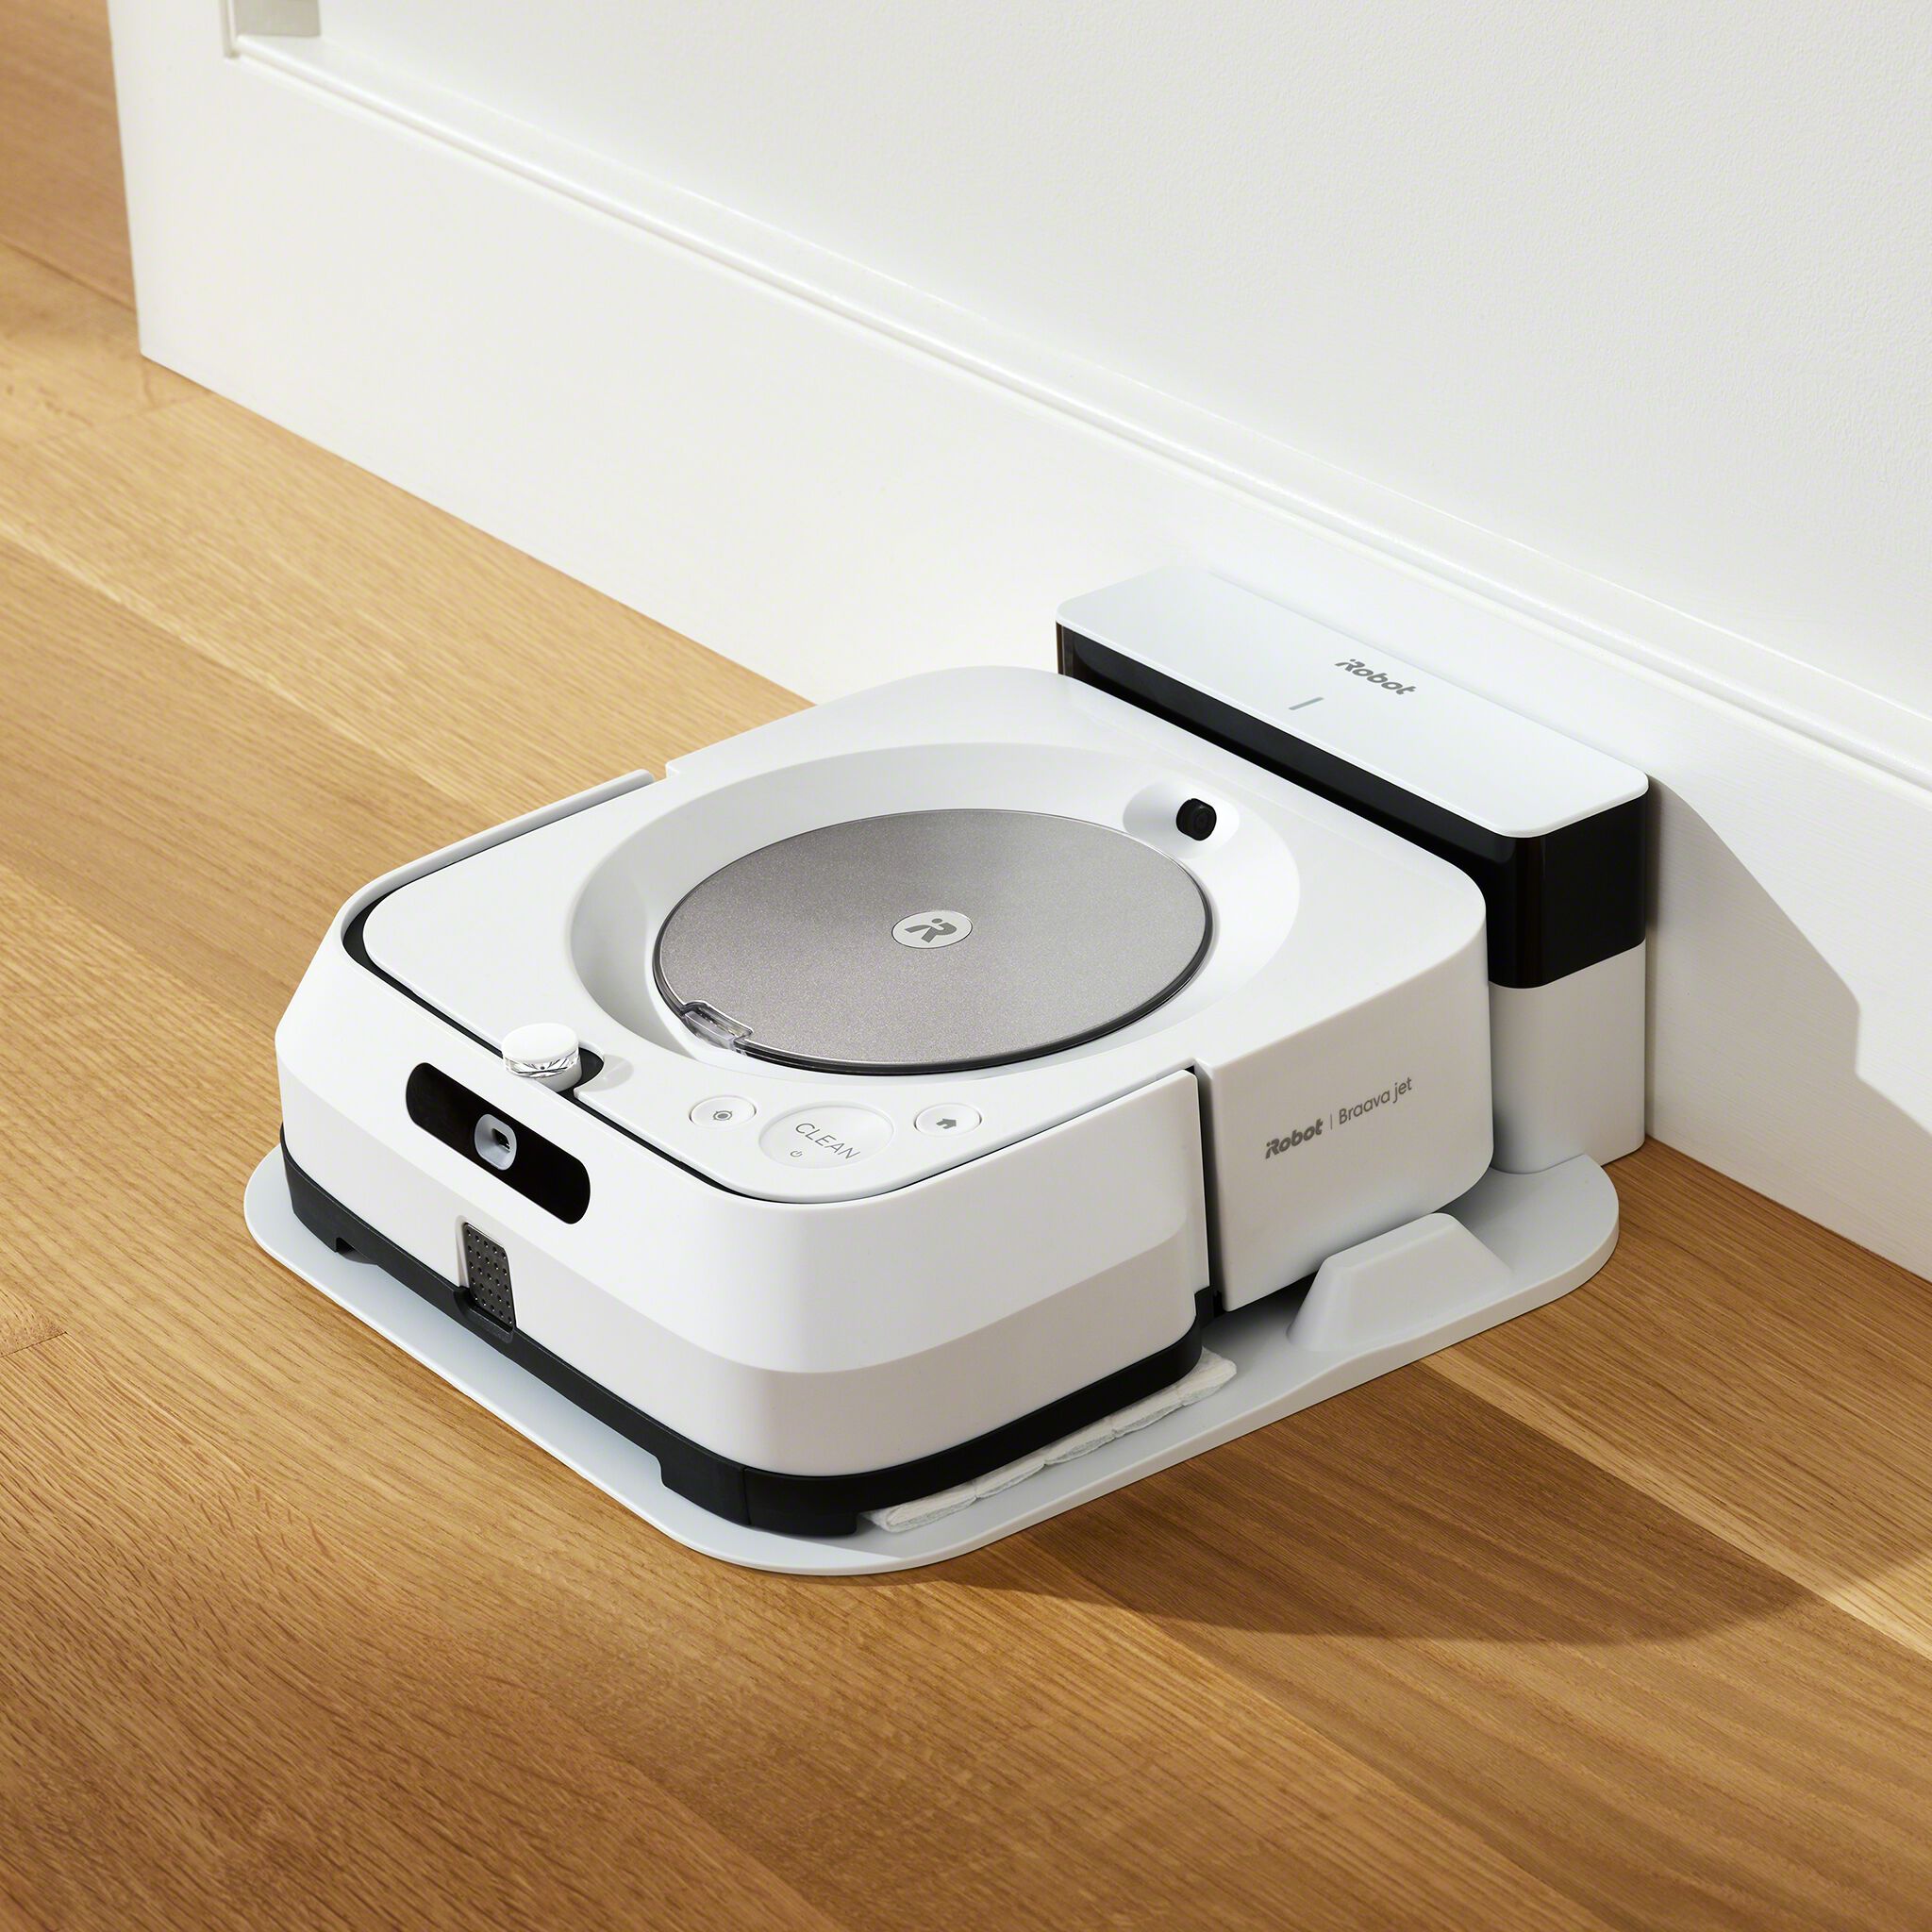 Review: iRobot's Braava Jet M6 is a Thorough Creature- The Mac Observer